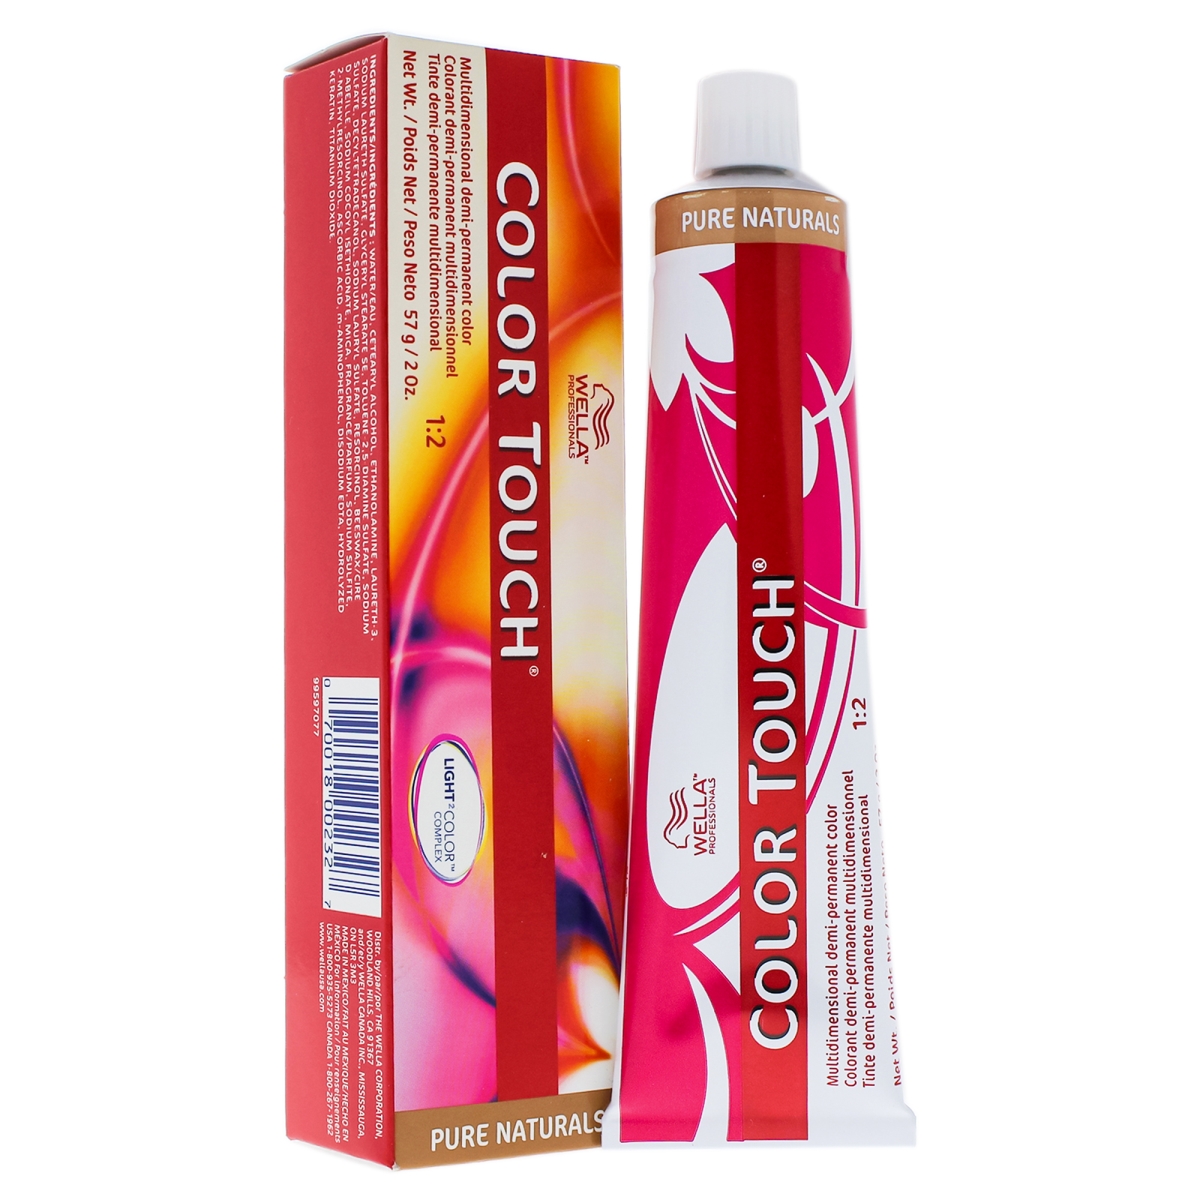 I0086477 Color Touch Demi & Permanent Hair Color For Unisex - 5 03 Light Brown & Natual Gold - 2 Oz